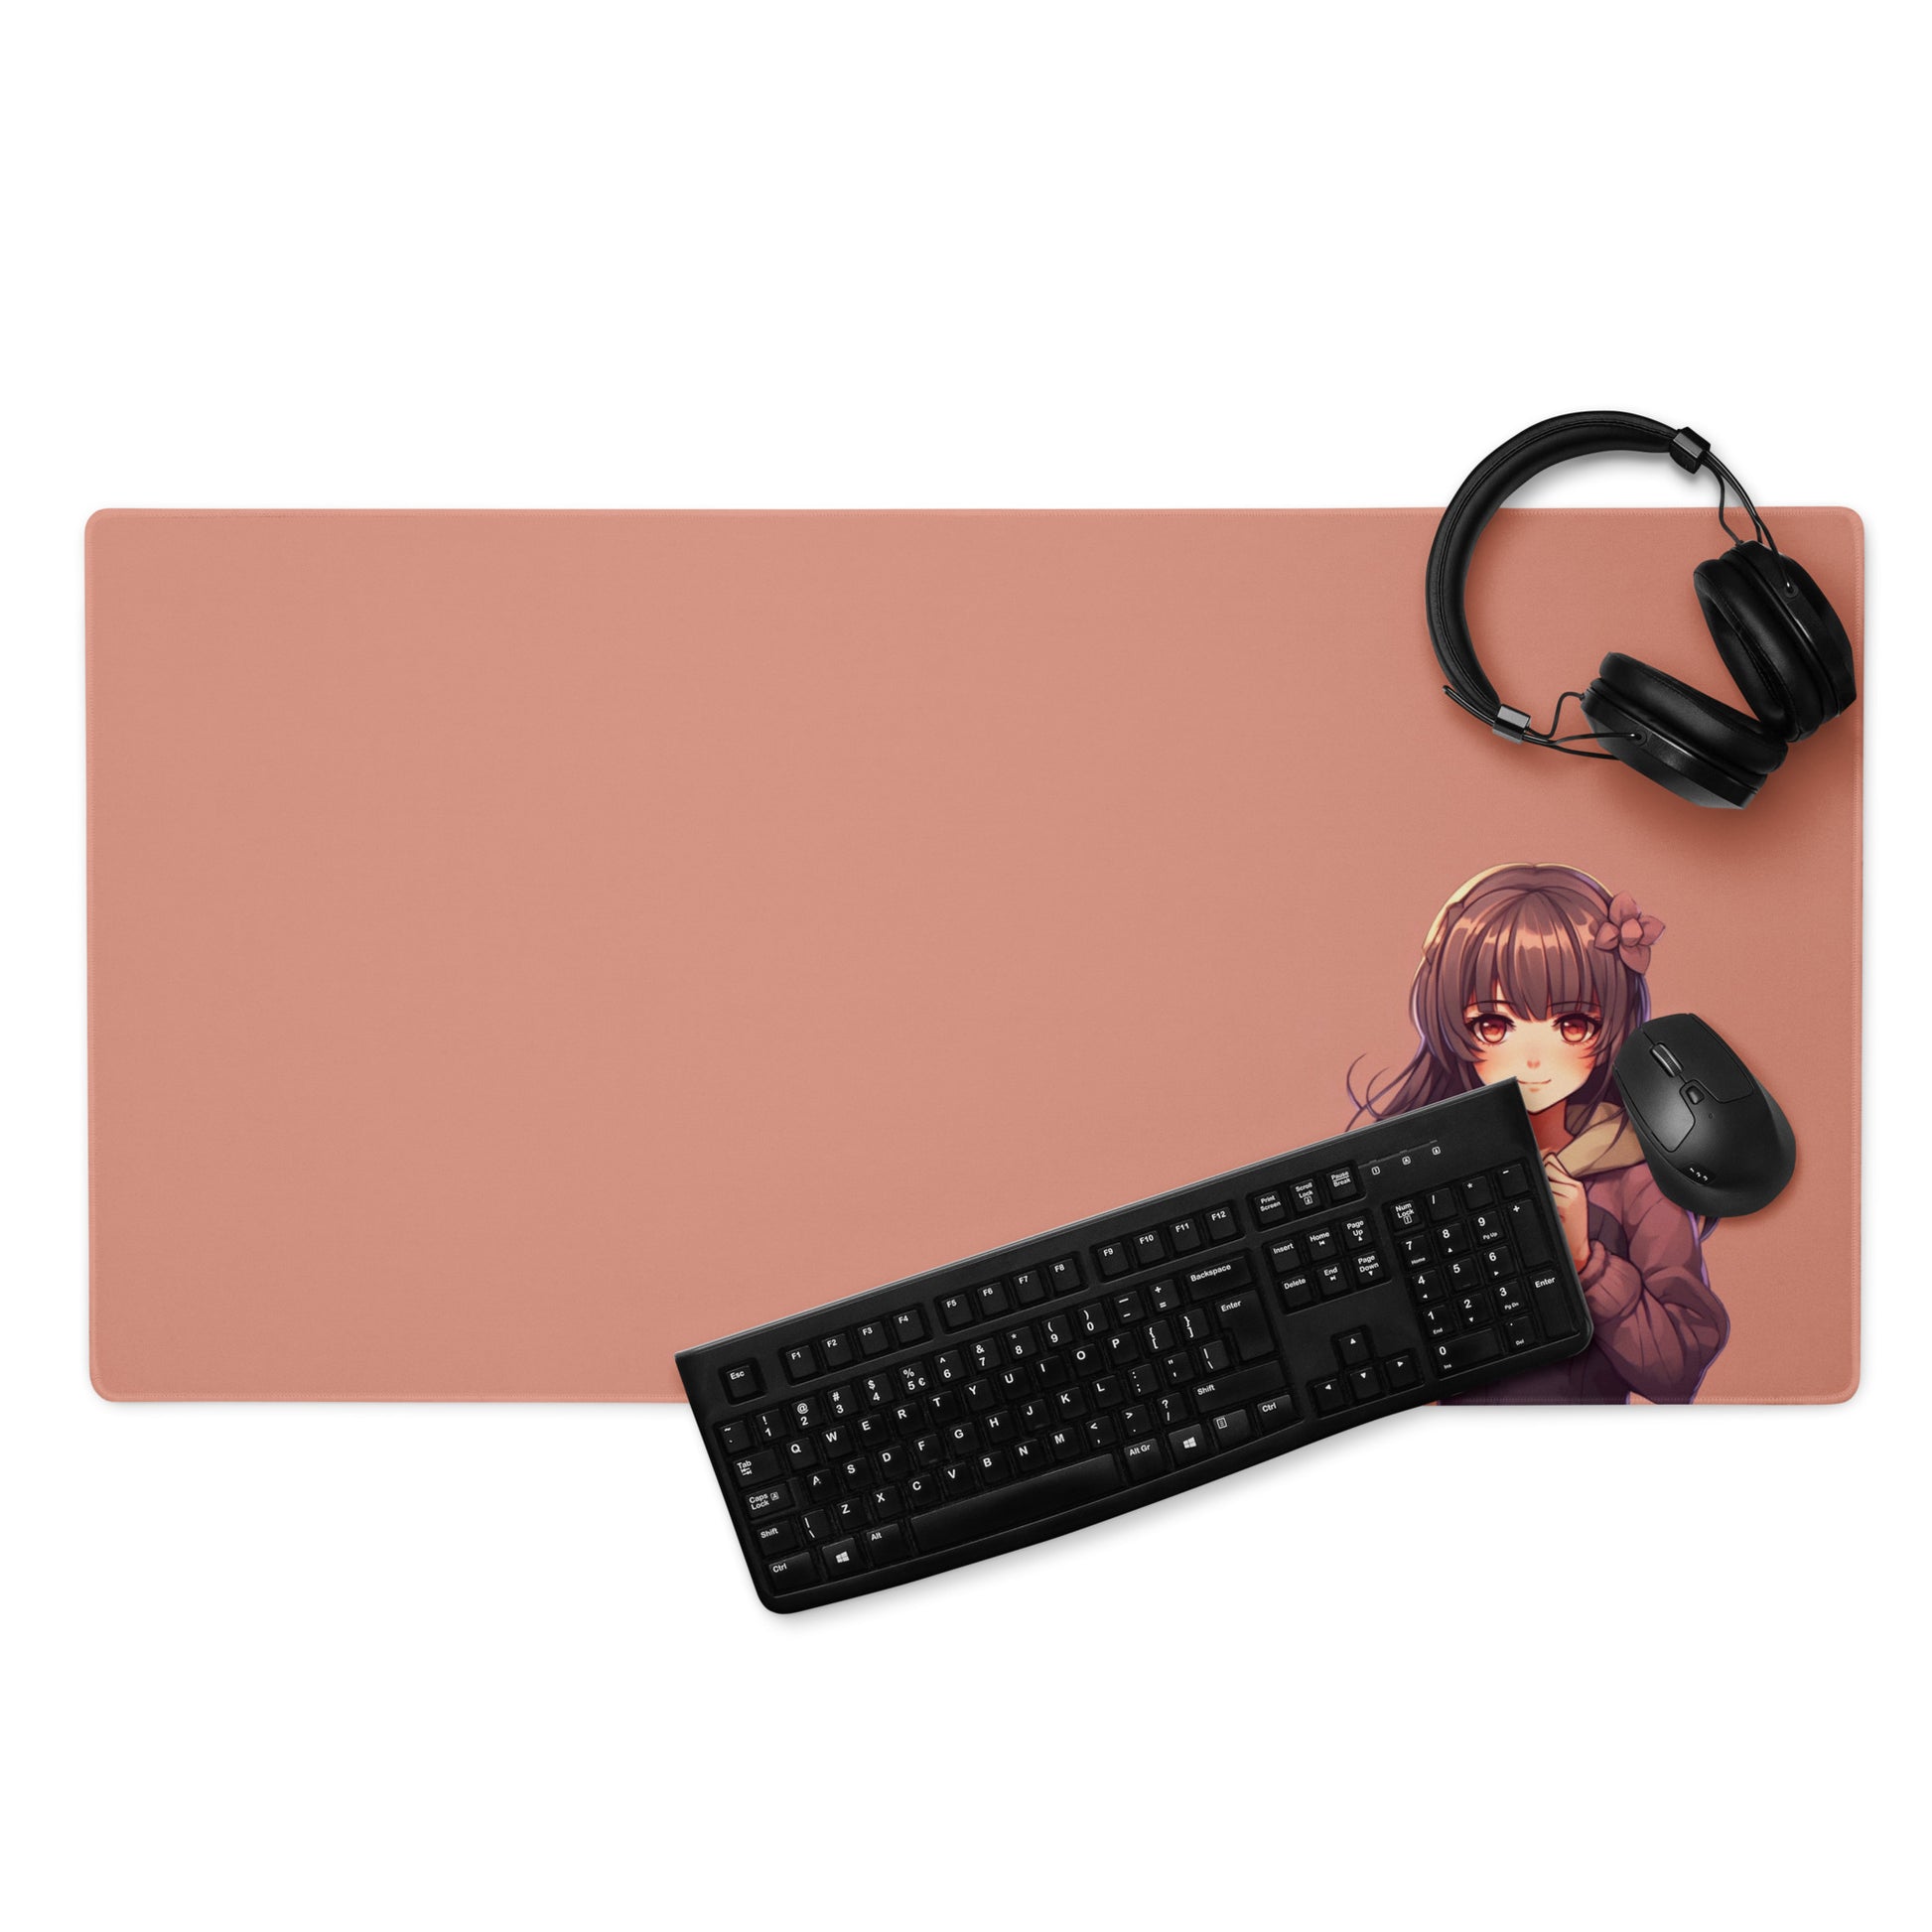 A 36" x 18" gaming desk pad with a blushing anime girl on a rose gold background. A keyboard mouse and headphones sit on top of it.